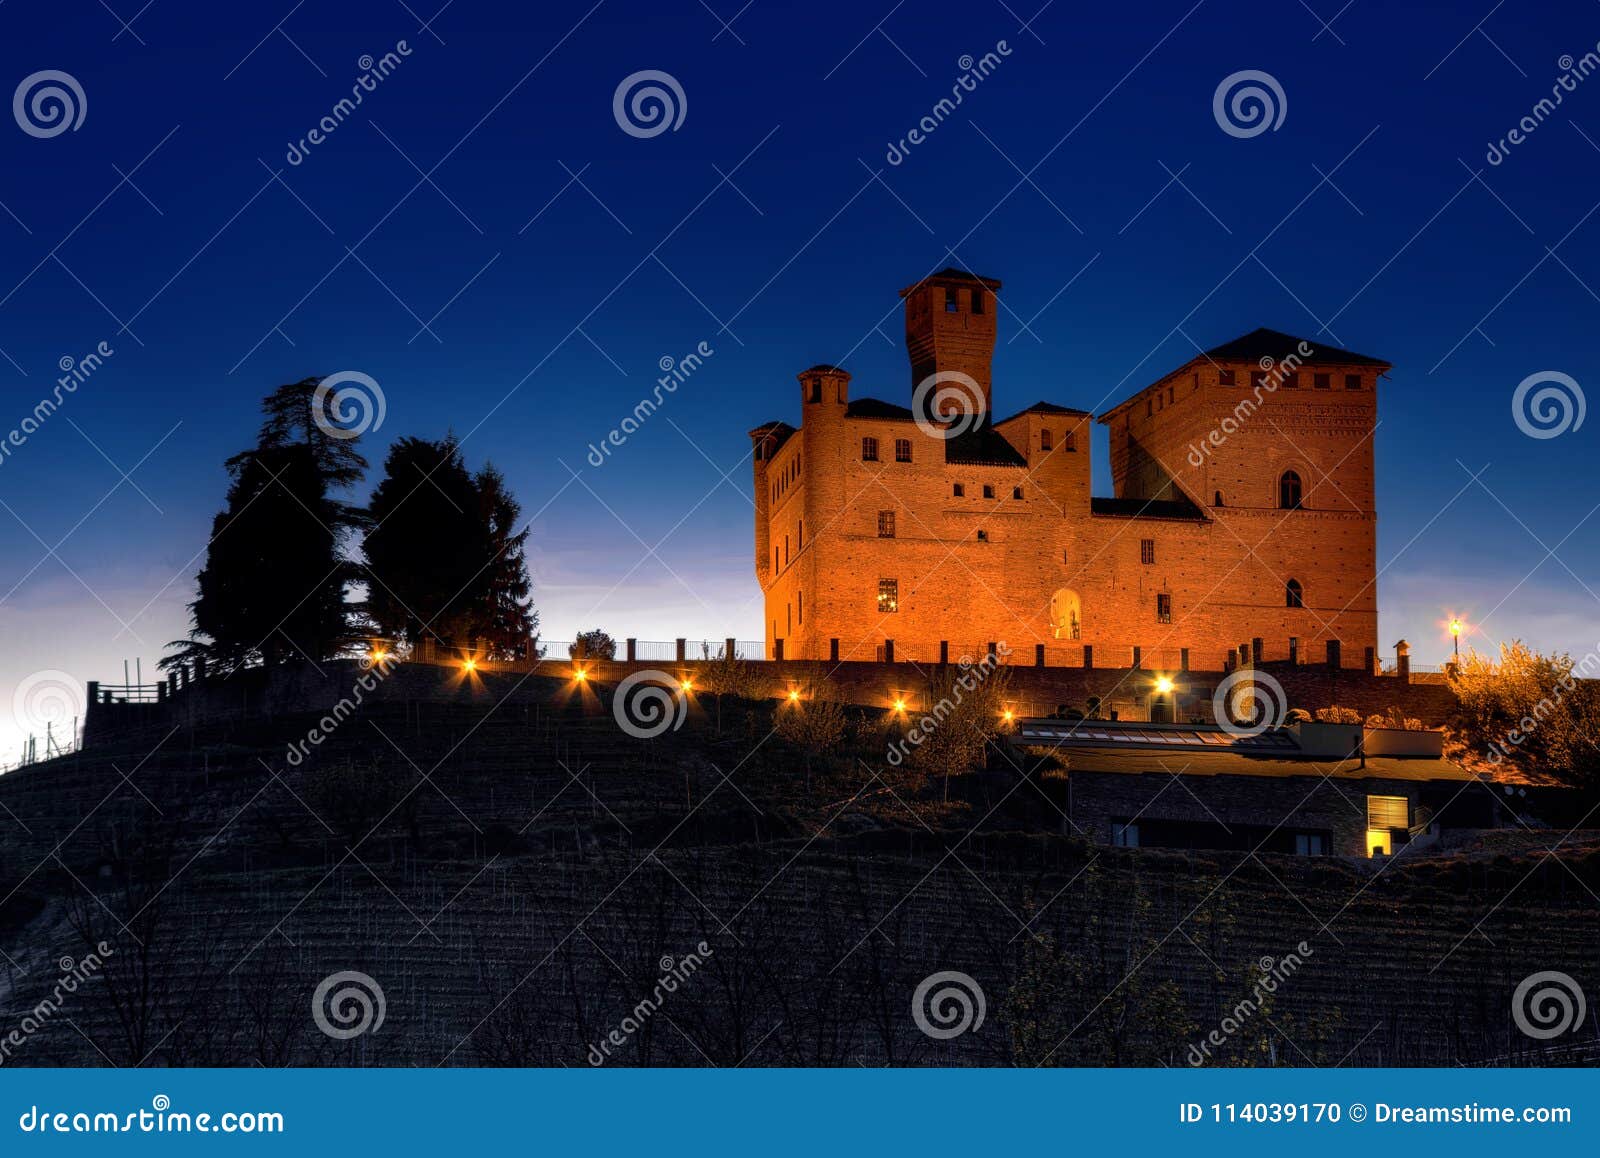 night view of the castle of grinzane cavour, in the langhe.